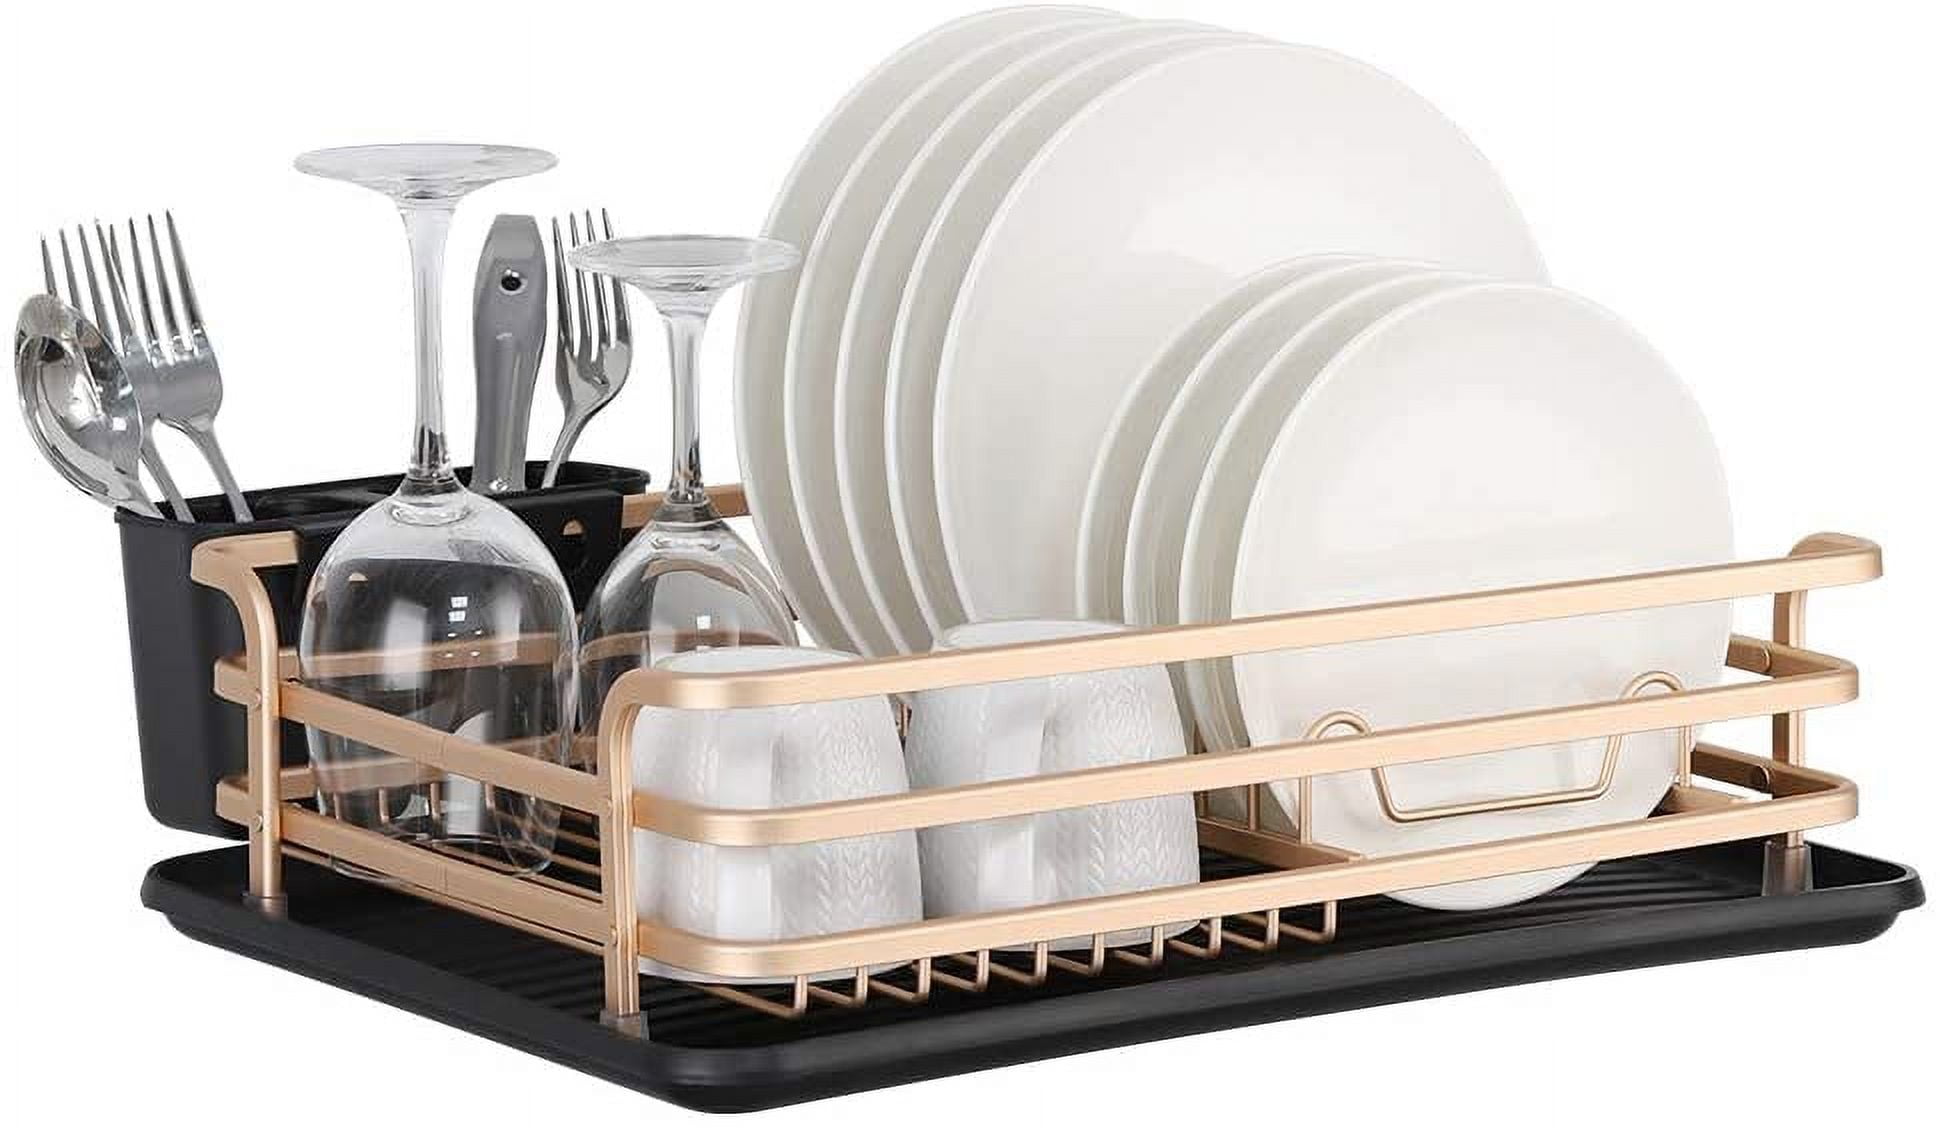 Aluminum Rose Gold Dish Rack with Removable Cutlery Holder Dish